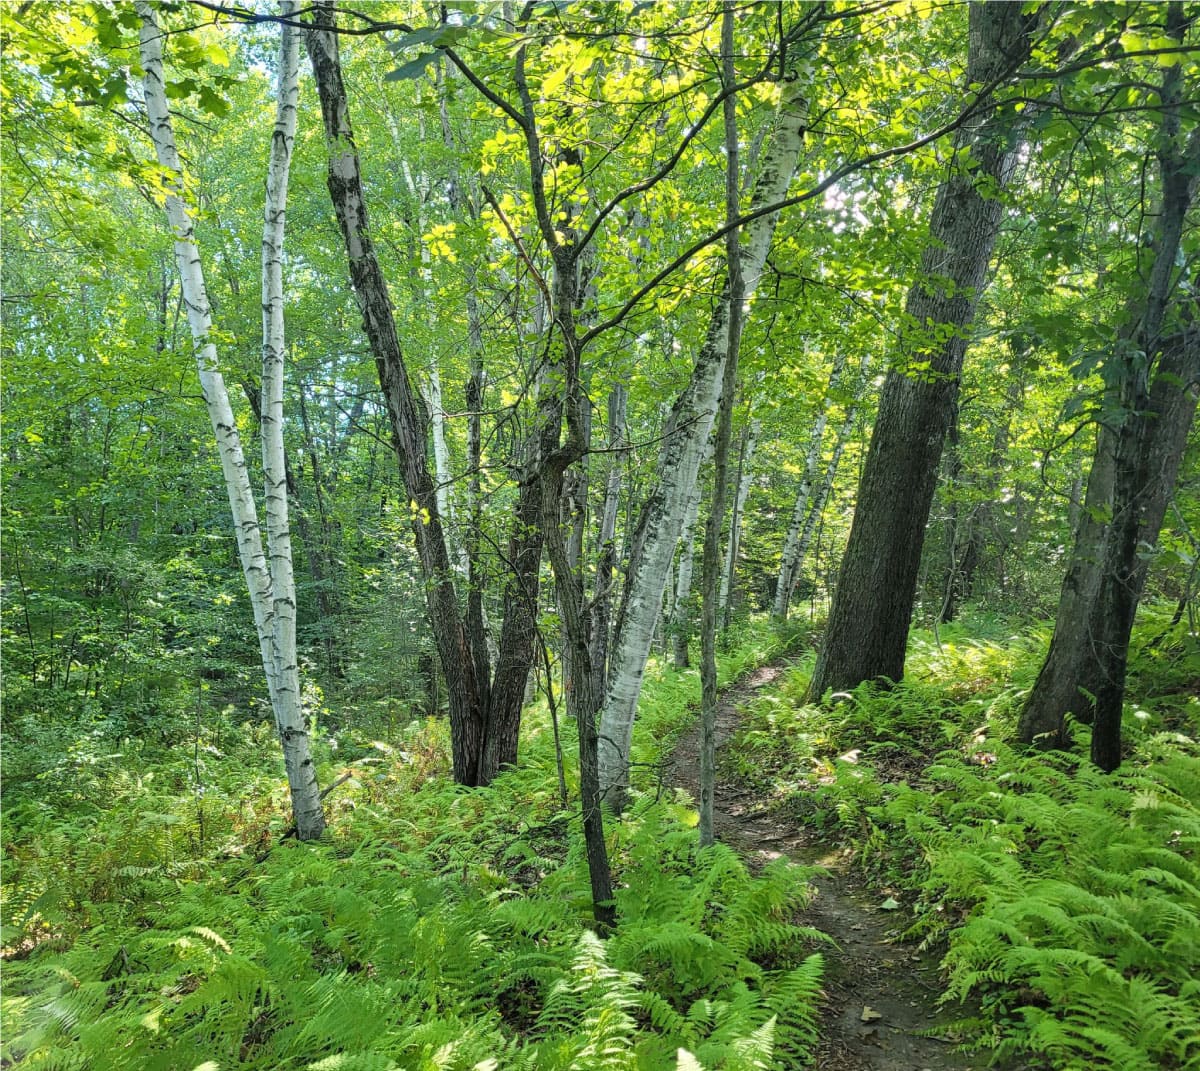 Forest in summer